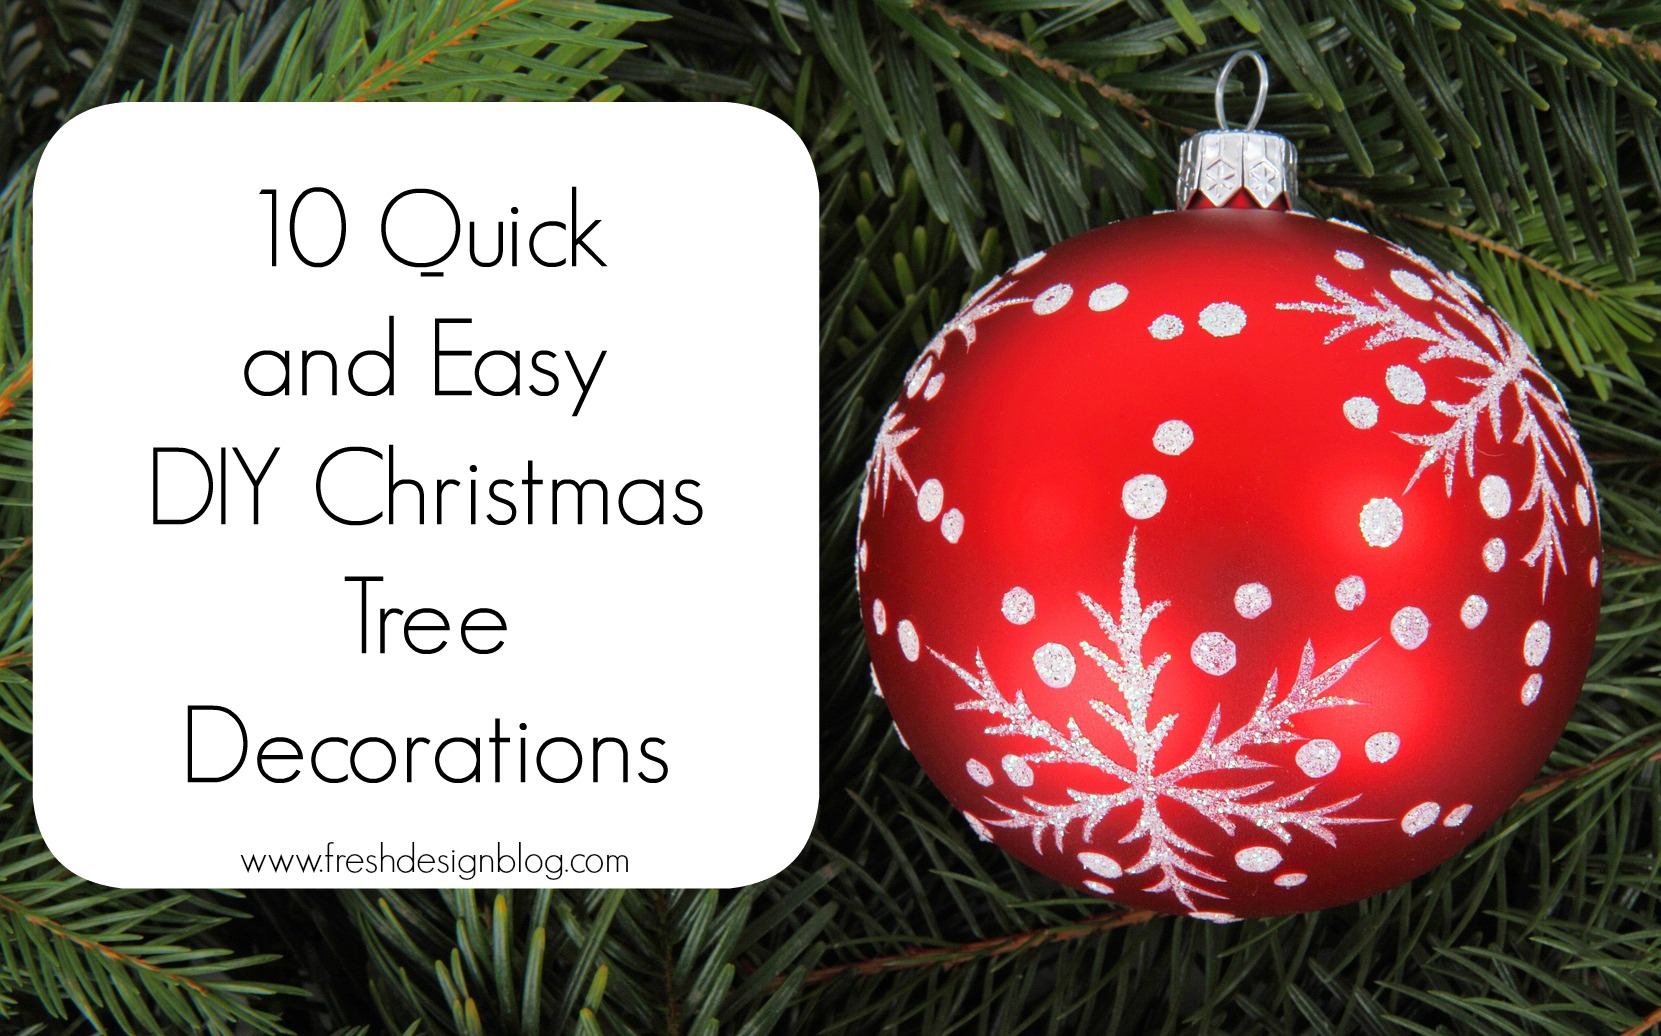 10 Quick and easy DIY Christmas tree decorations | Fresh Design Blog